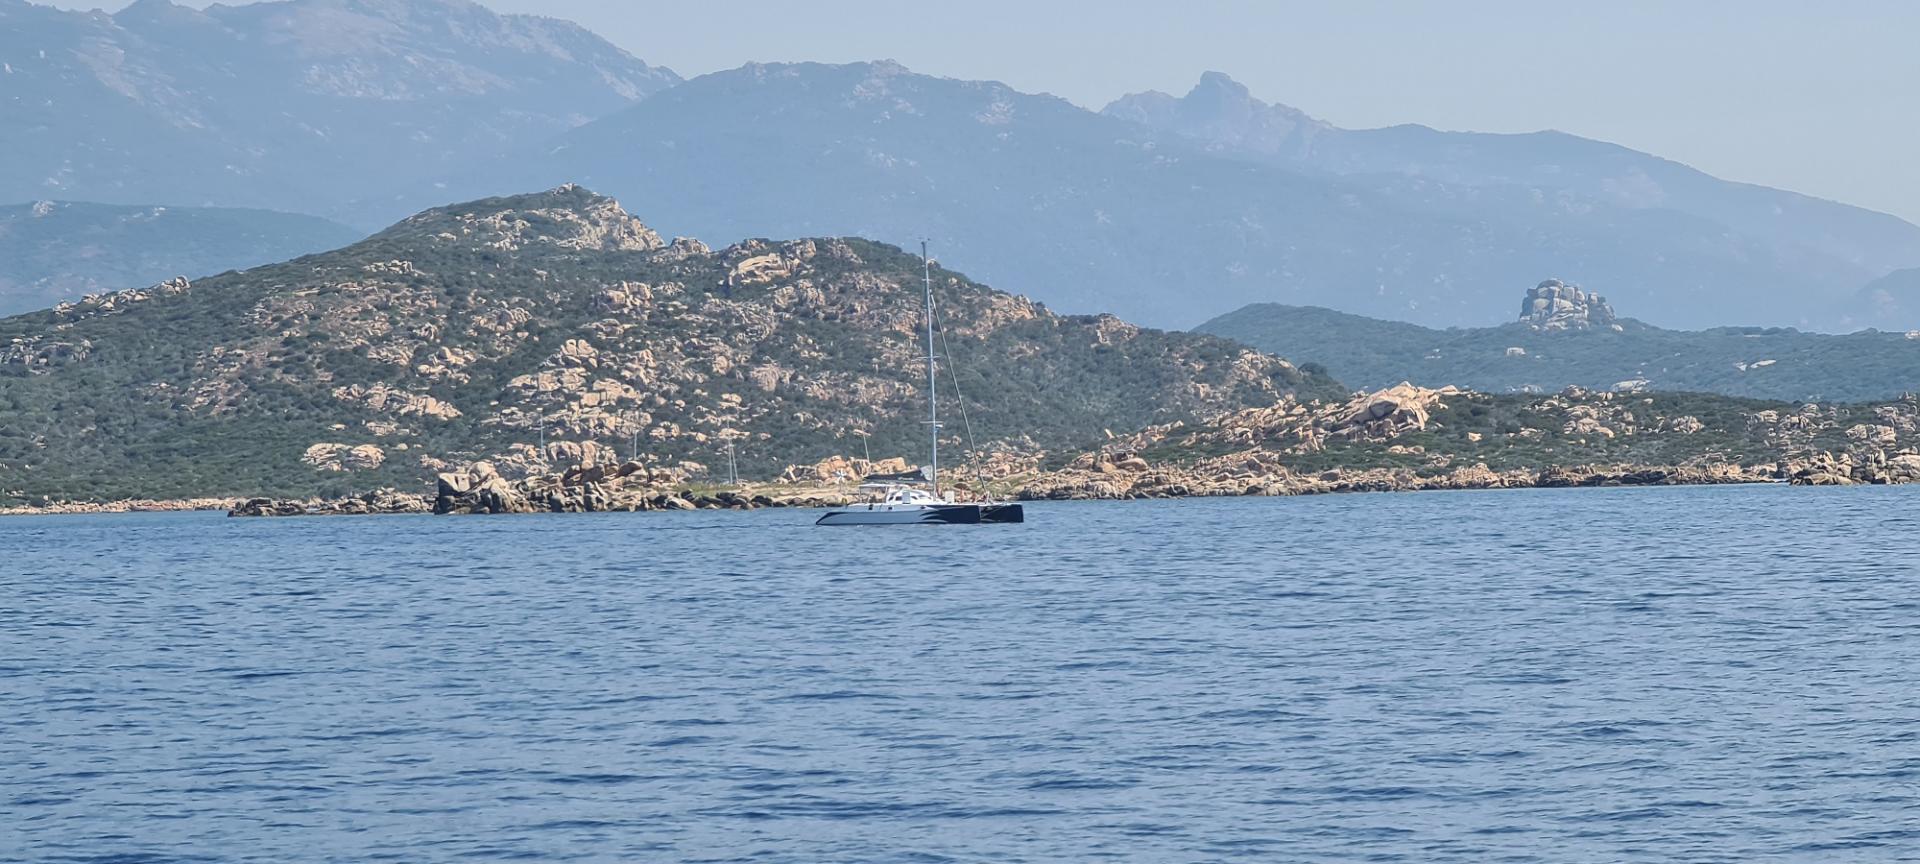 Outremer 45 in corsica